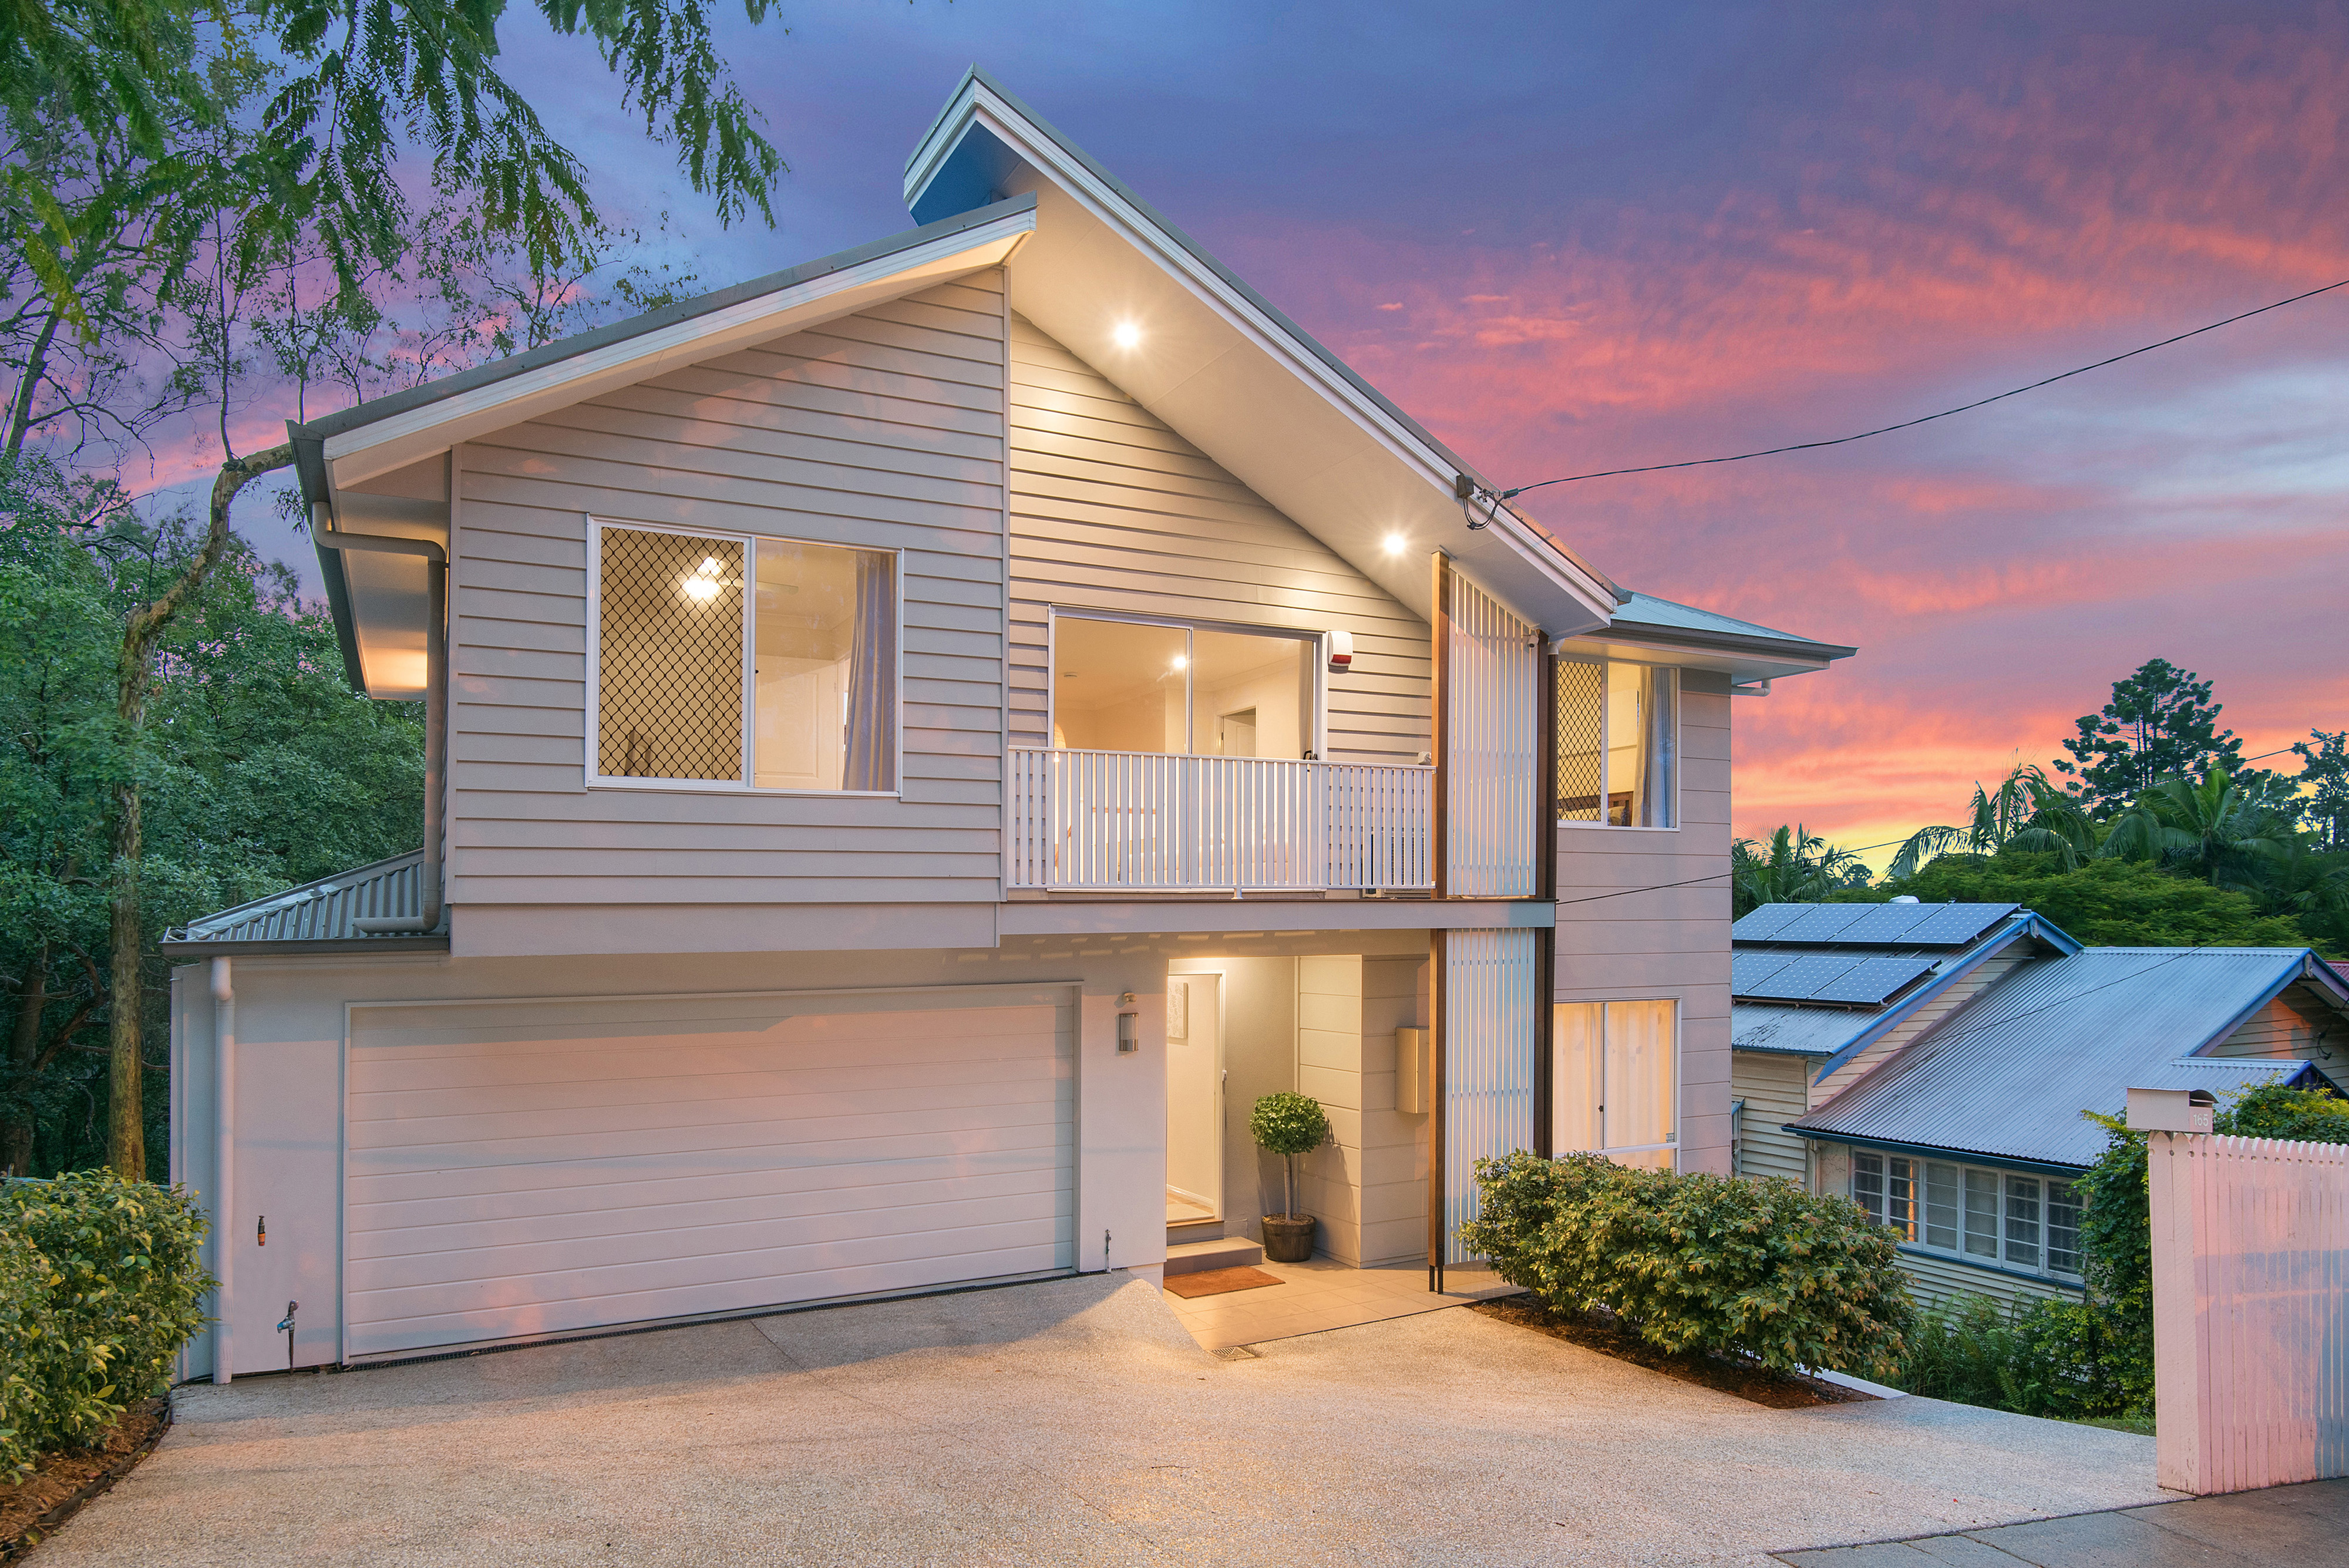 Should I list my property exclusively or with multiple agents in Brisbane?